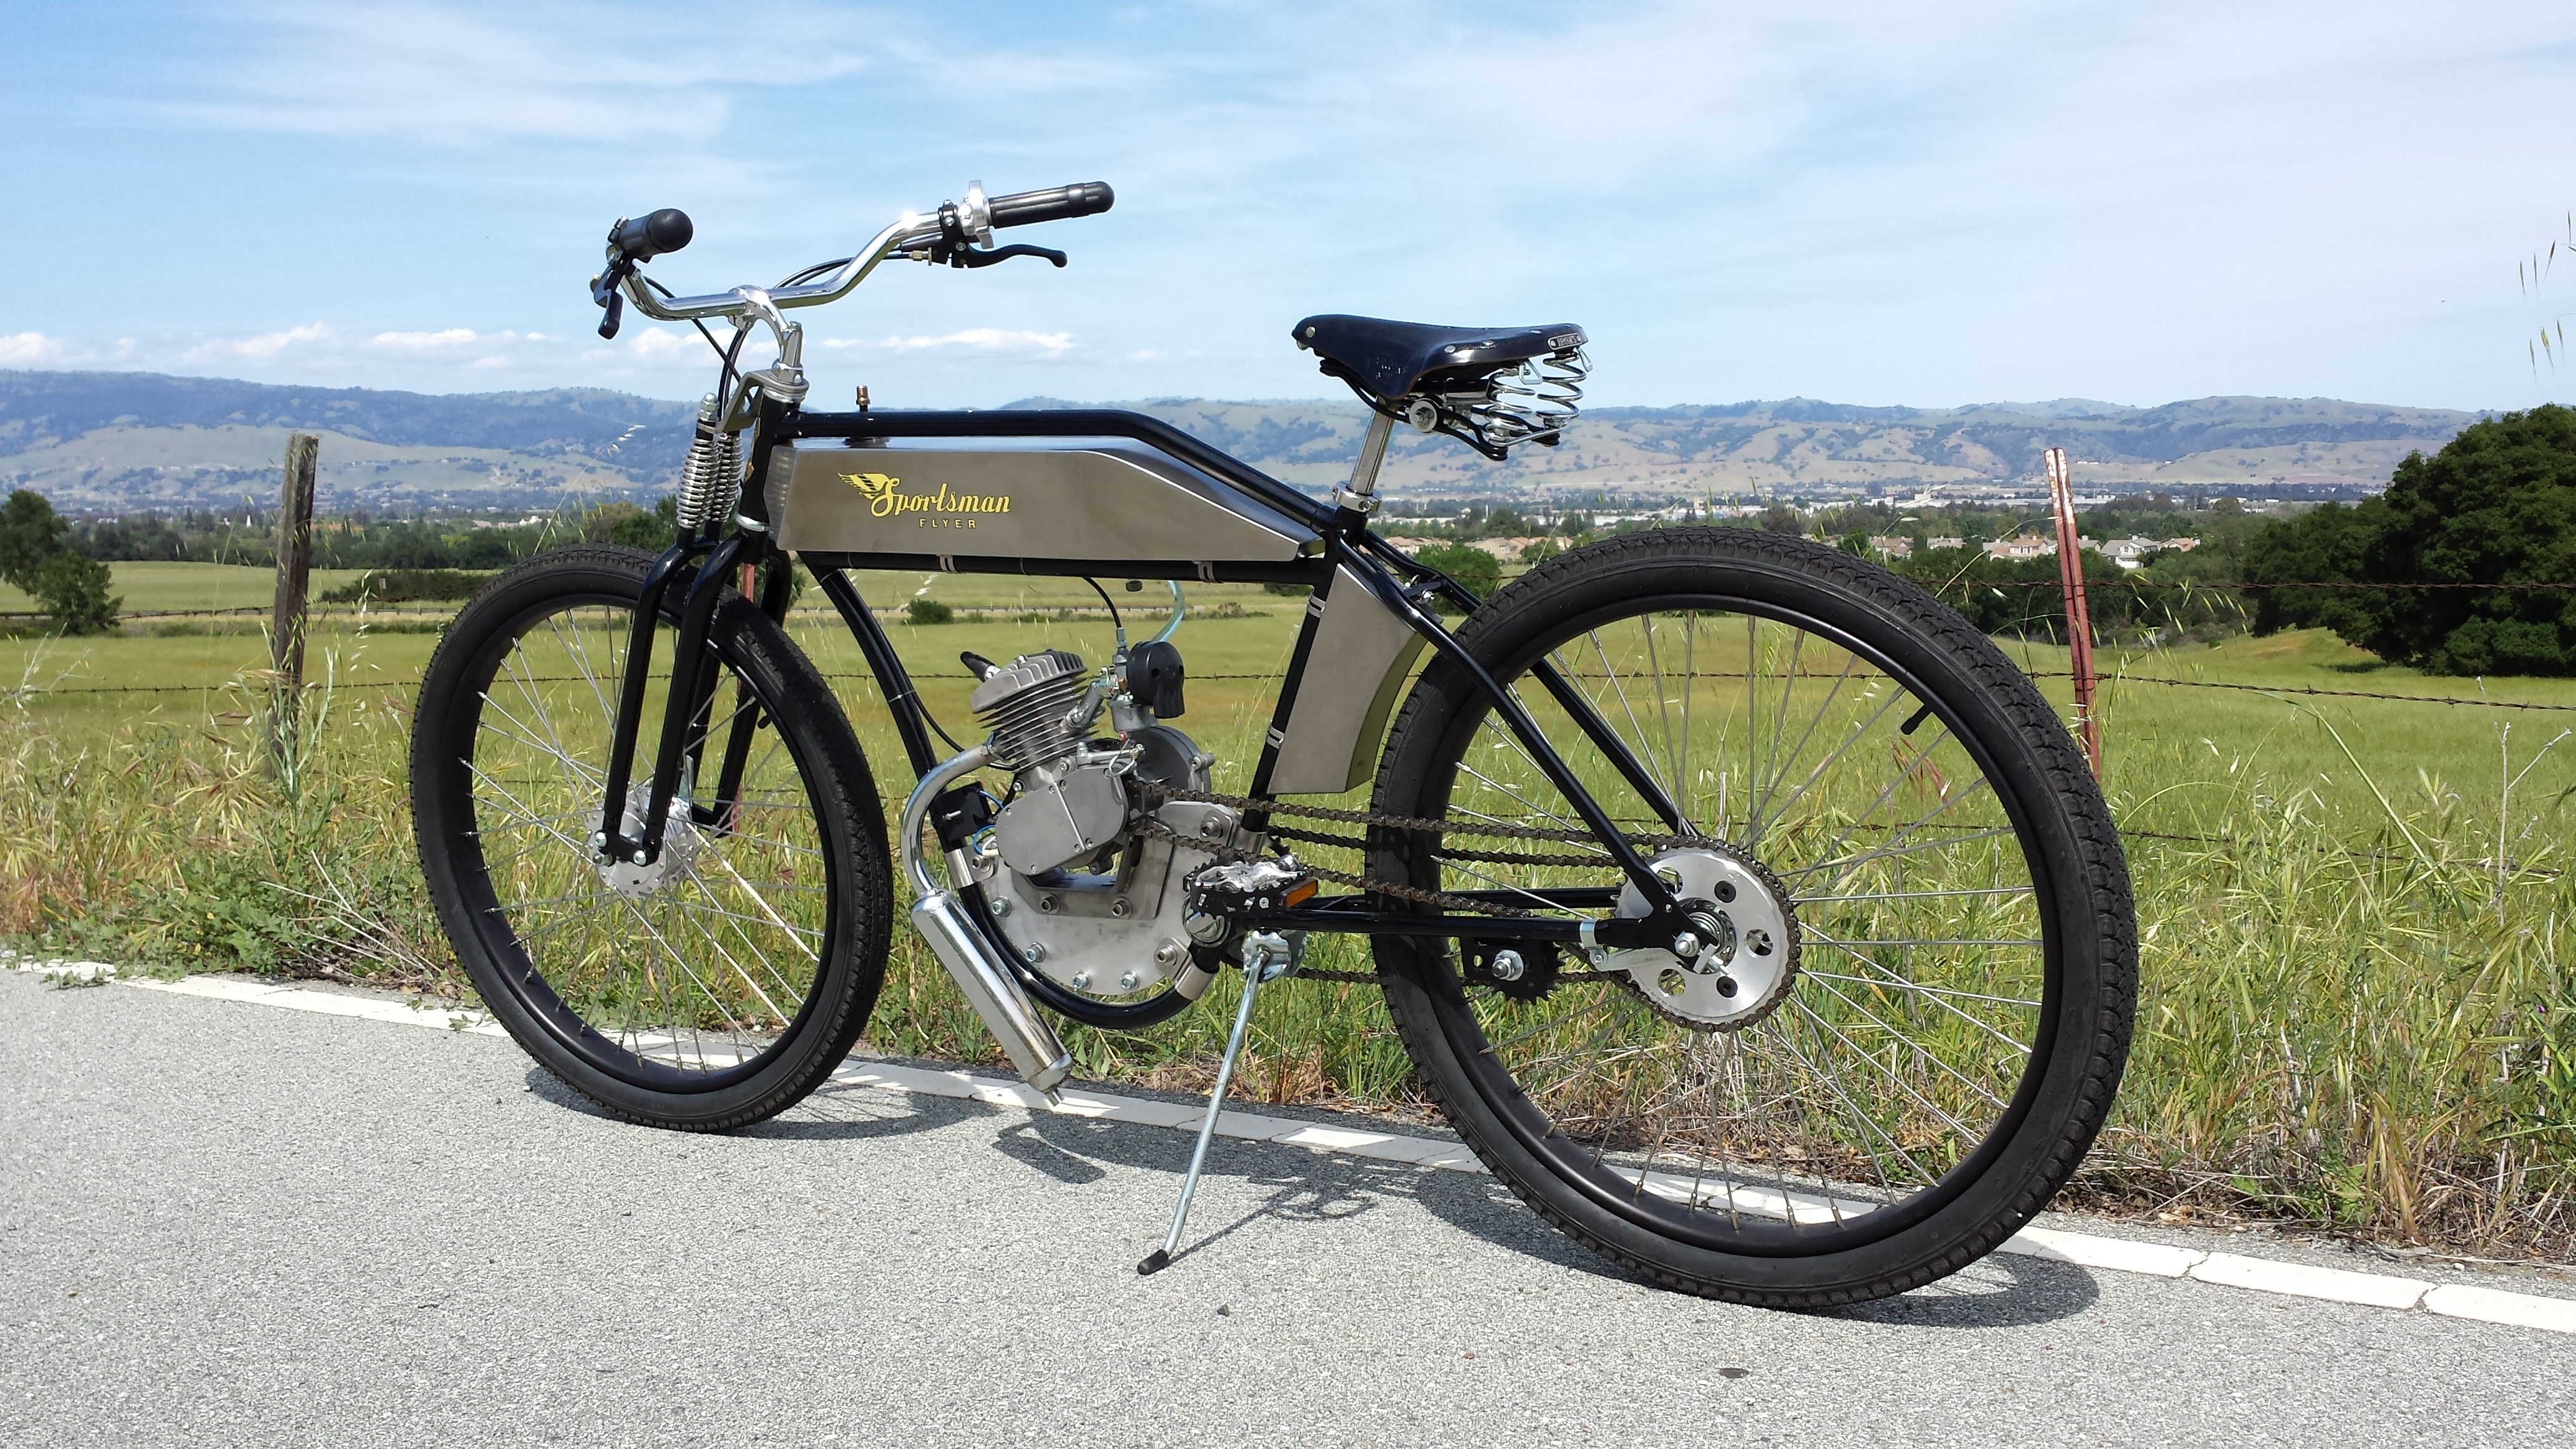 Worksman Sportsman Flyer Available Now Motorized Bicycle Engine Kit Forum